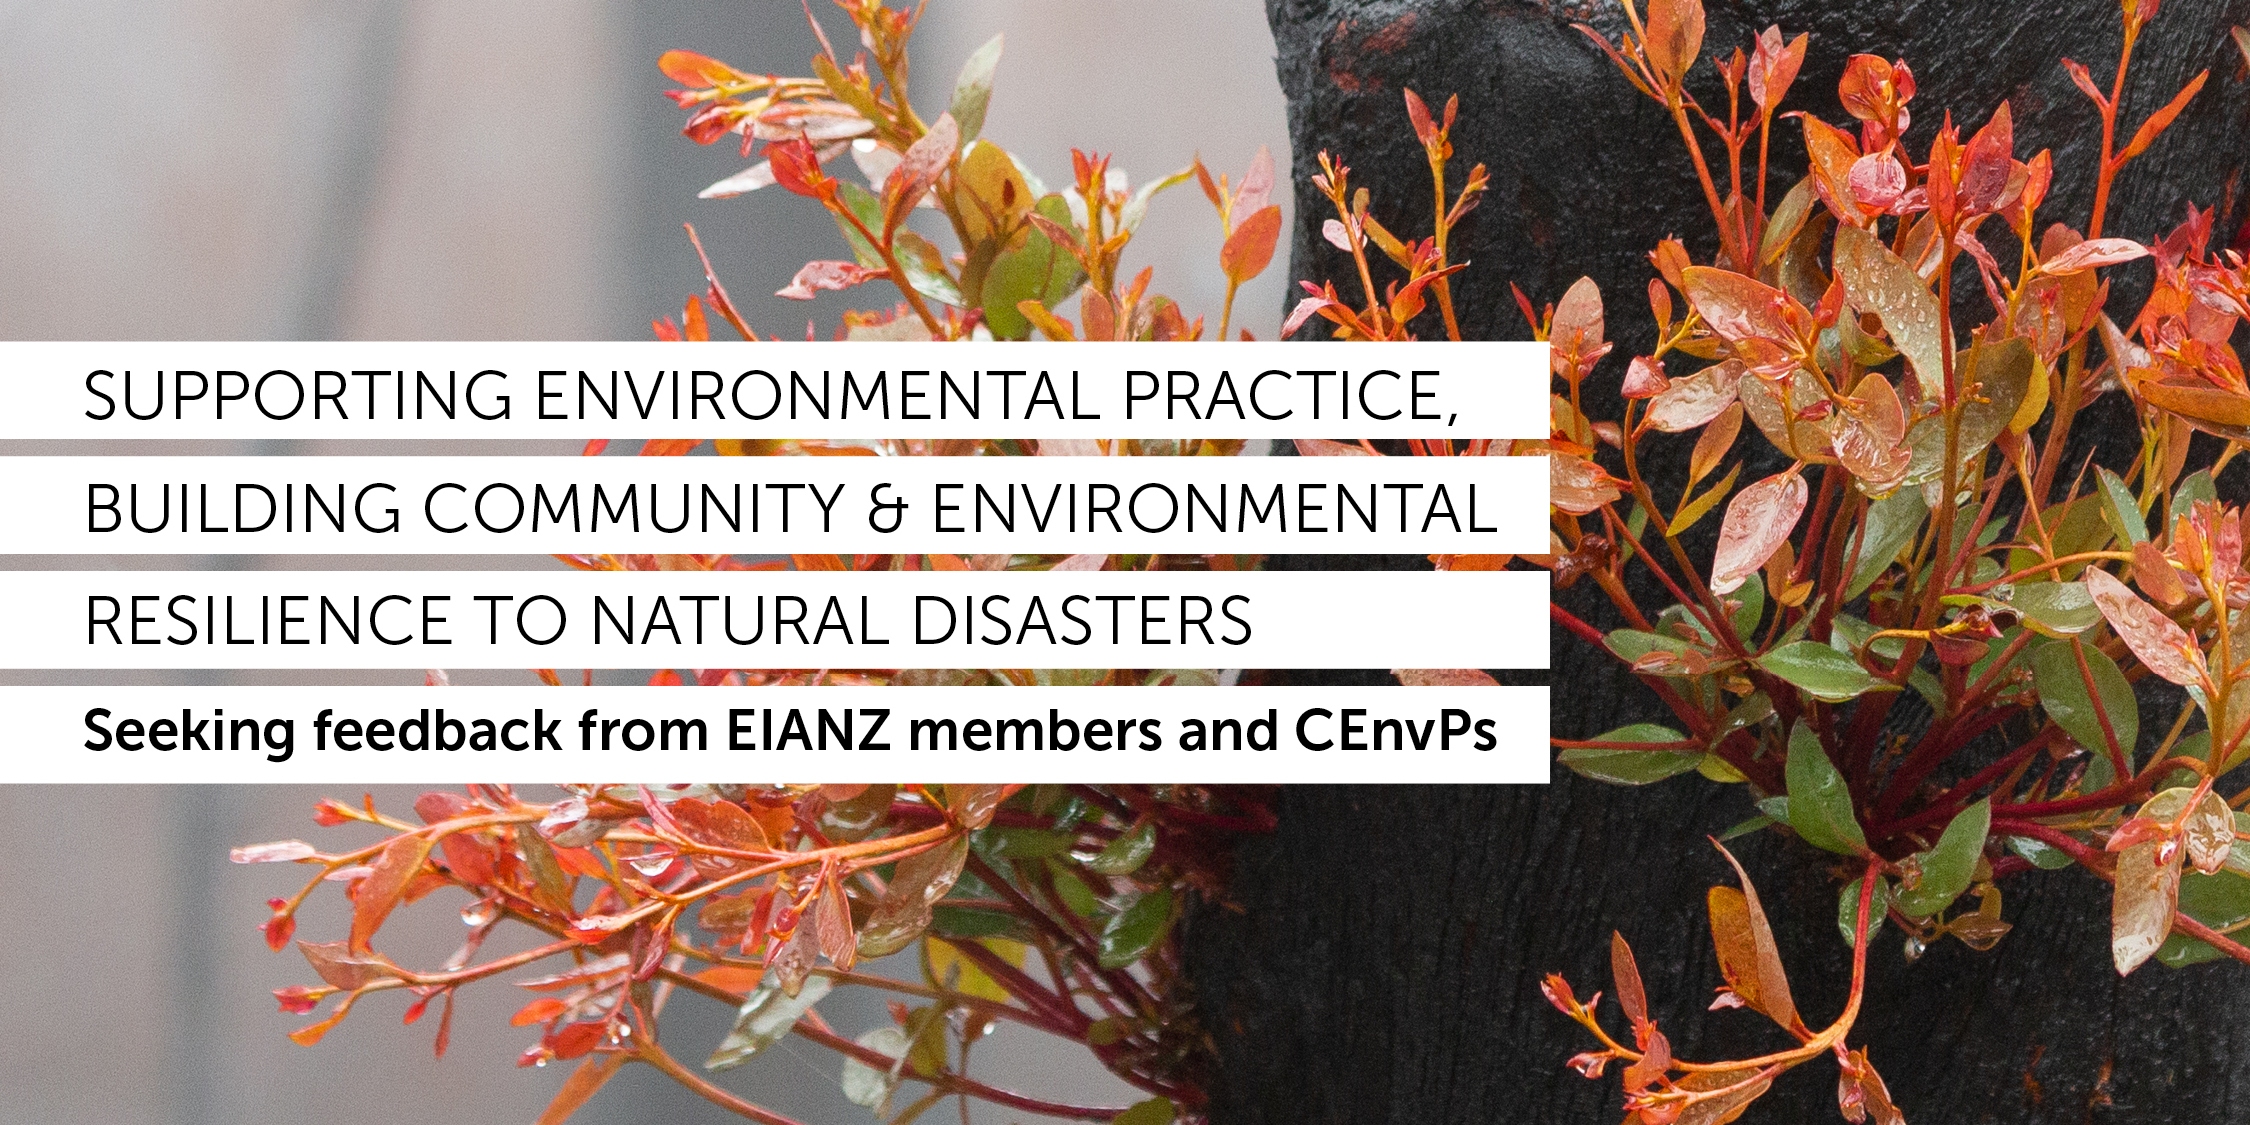 Supporting environmental practice, building community & environmental resilience to natural disasters